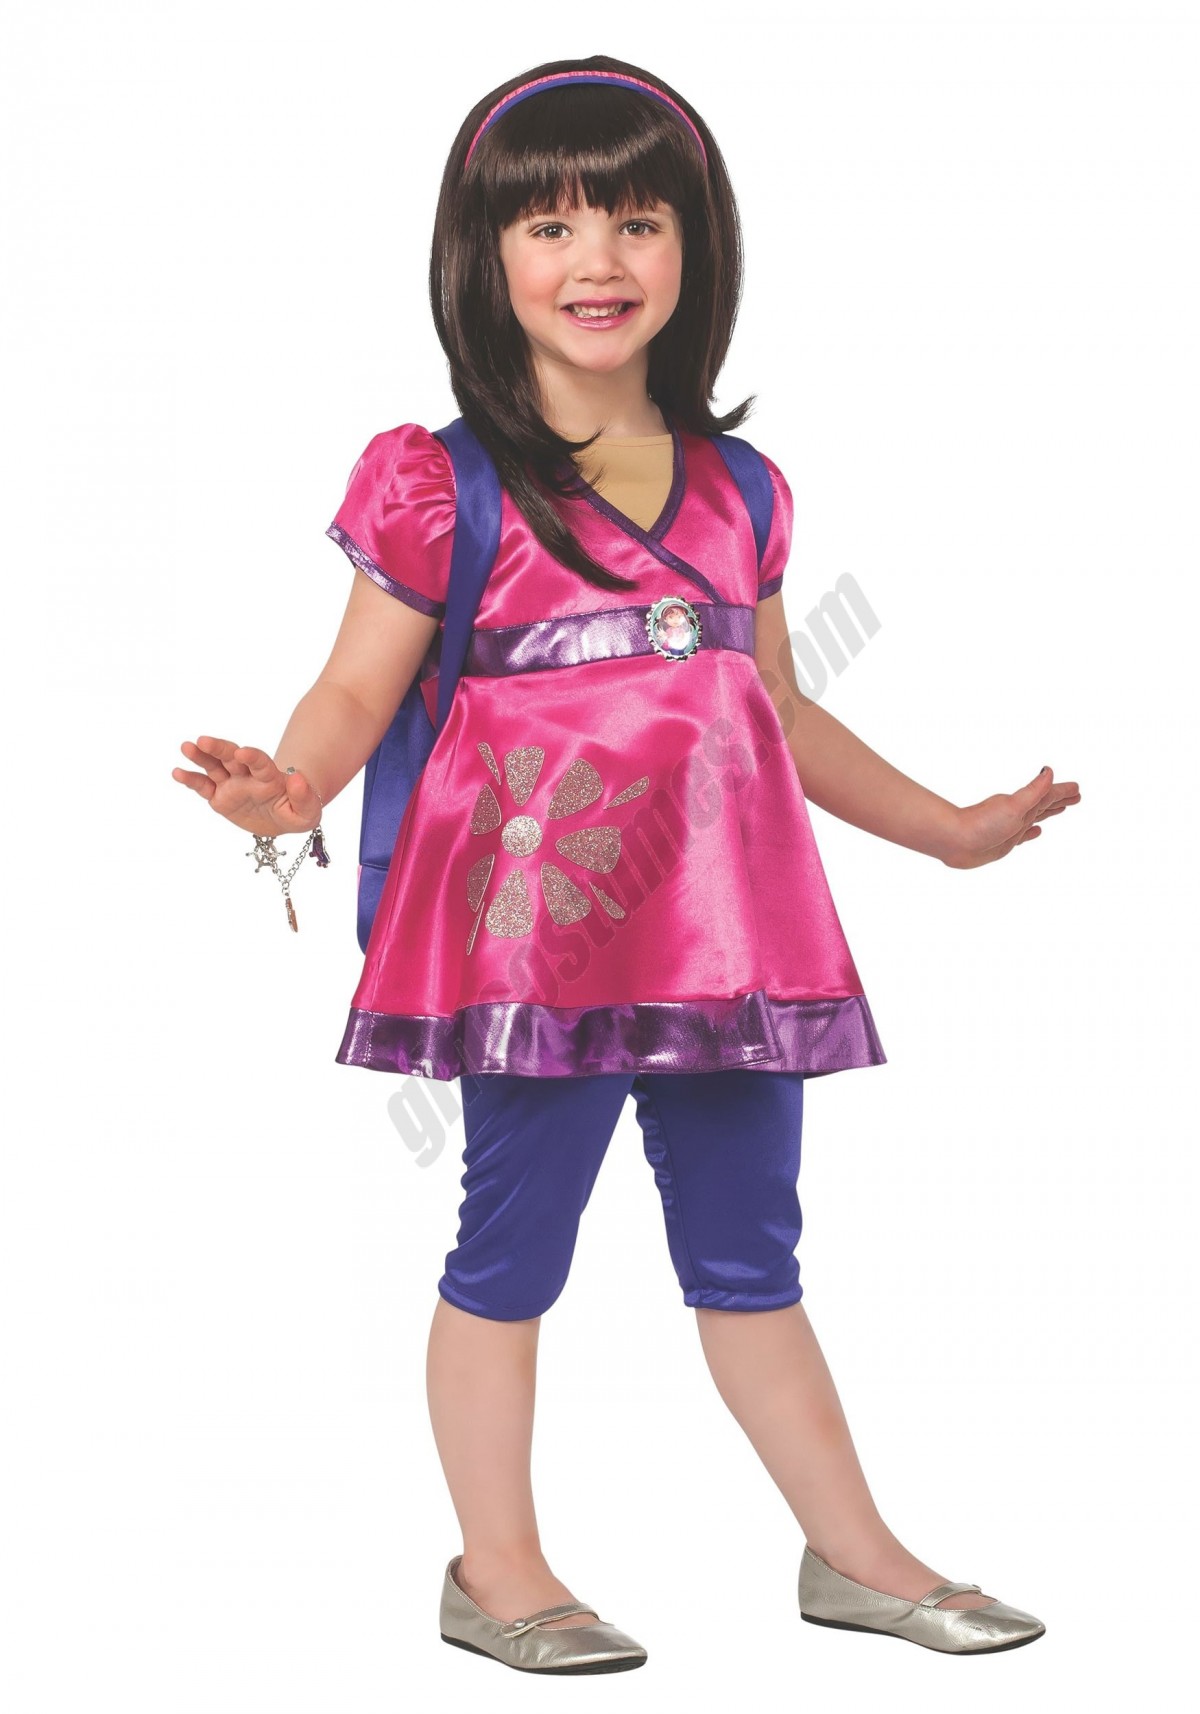 Toddler Deluxe Dora the Explorer Costume Promotions - -0